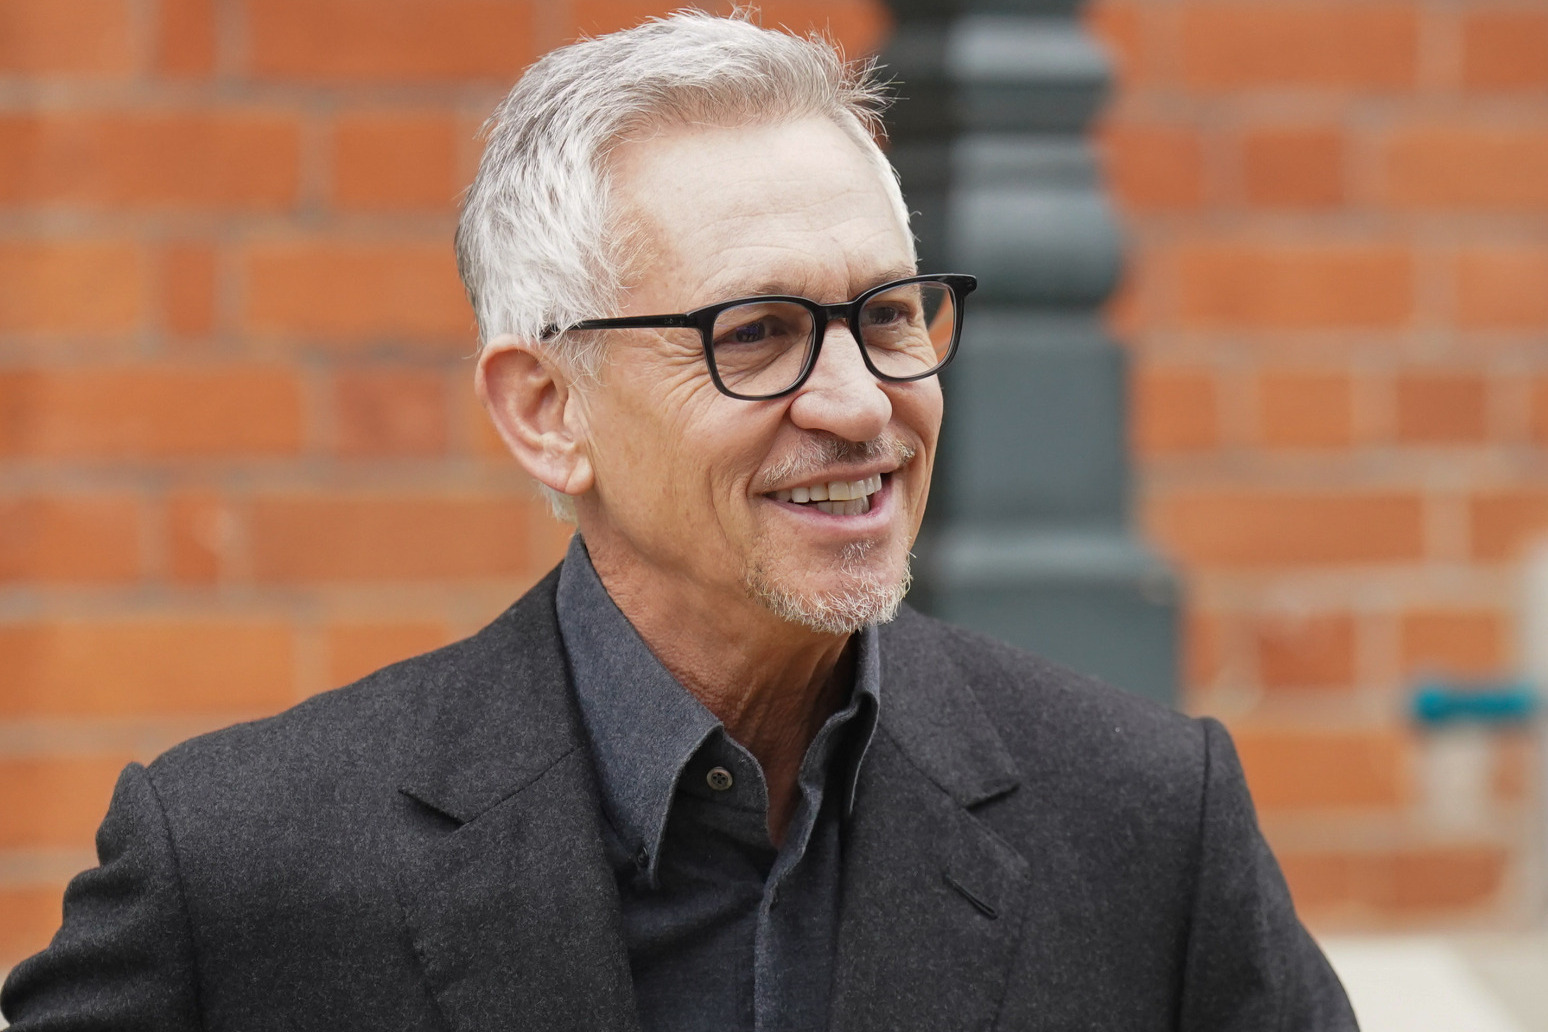 Gary Lineker to ‘step back’ from Match Of The Day amid asylum remarks row 